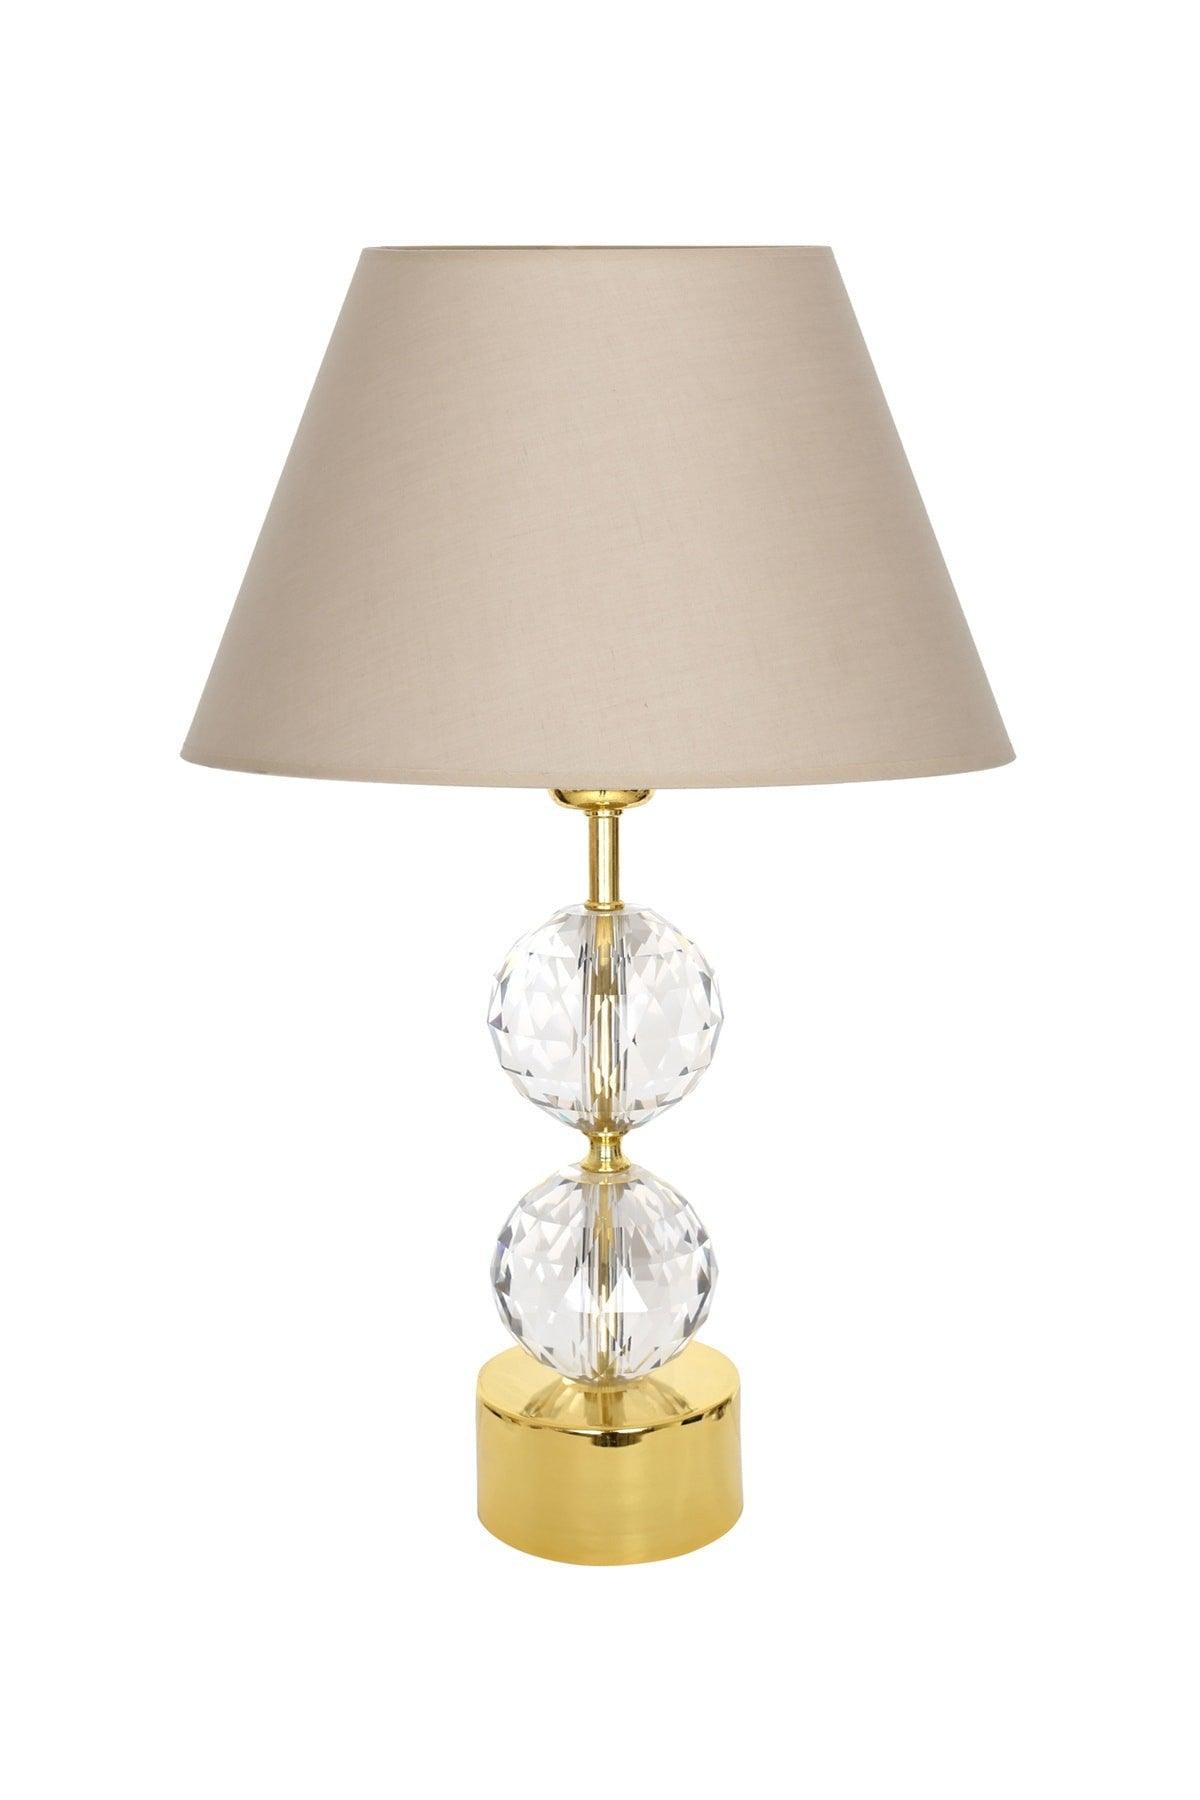 Gld-krs01 Gold Footed Crystal Lampshade - Cream - Swordslife